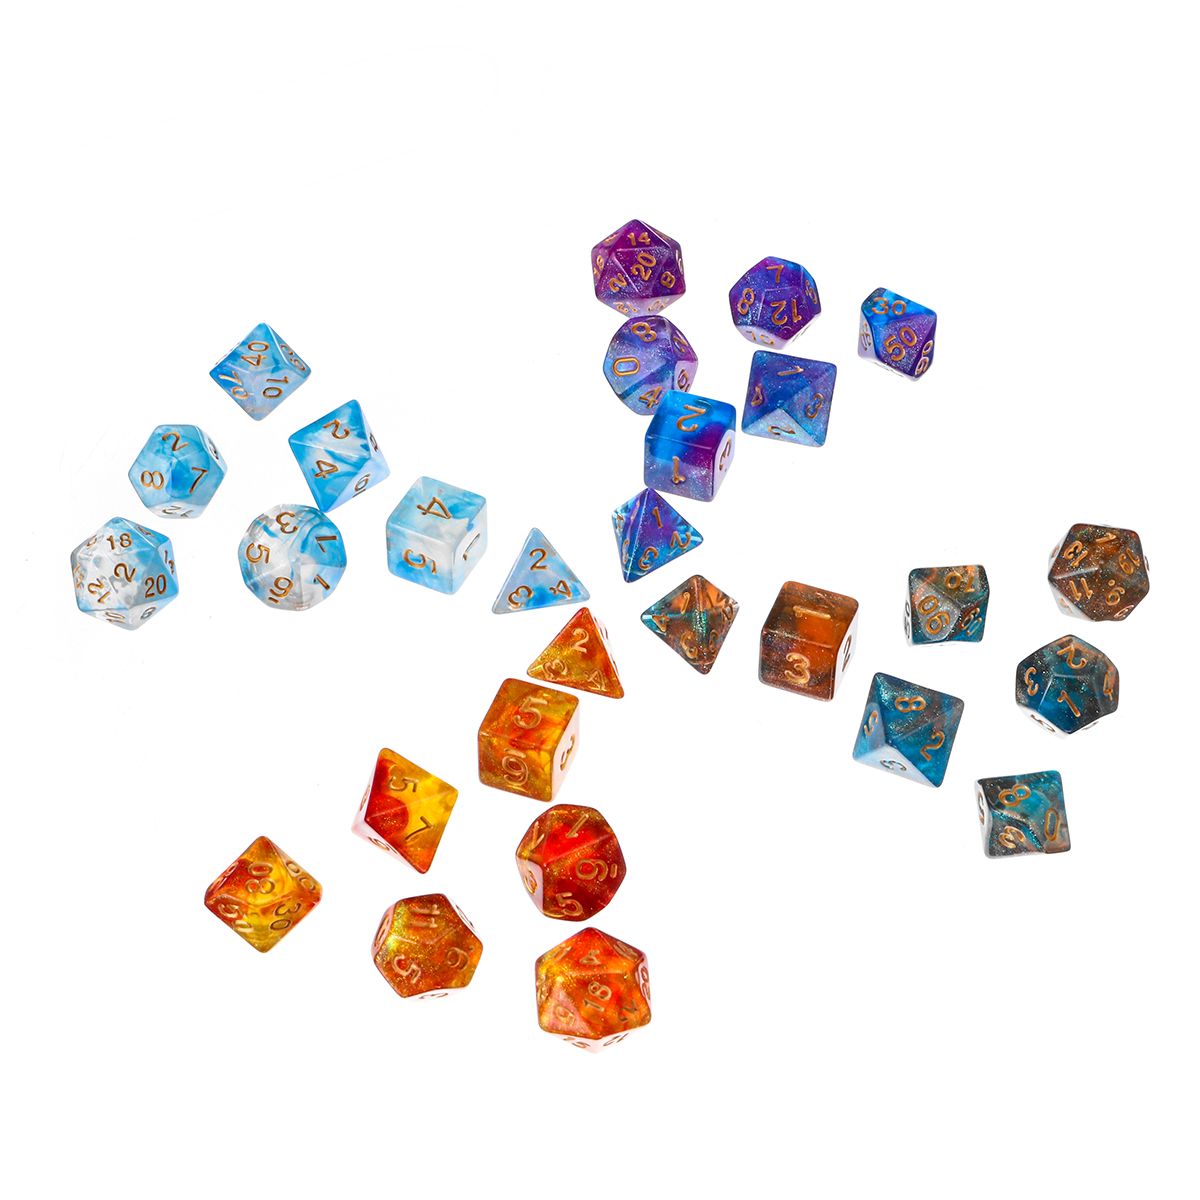 28Pcs-Galaxy-Concept-Polyhedral-Dice-Acrylic-Dices-Role-Playing-Board-Table-Game-With-Pouch-1709494